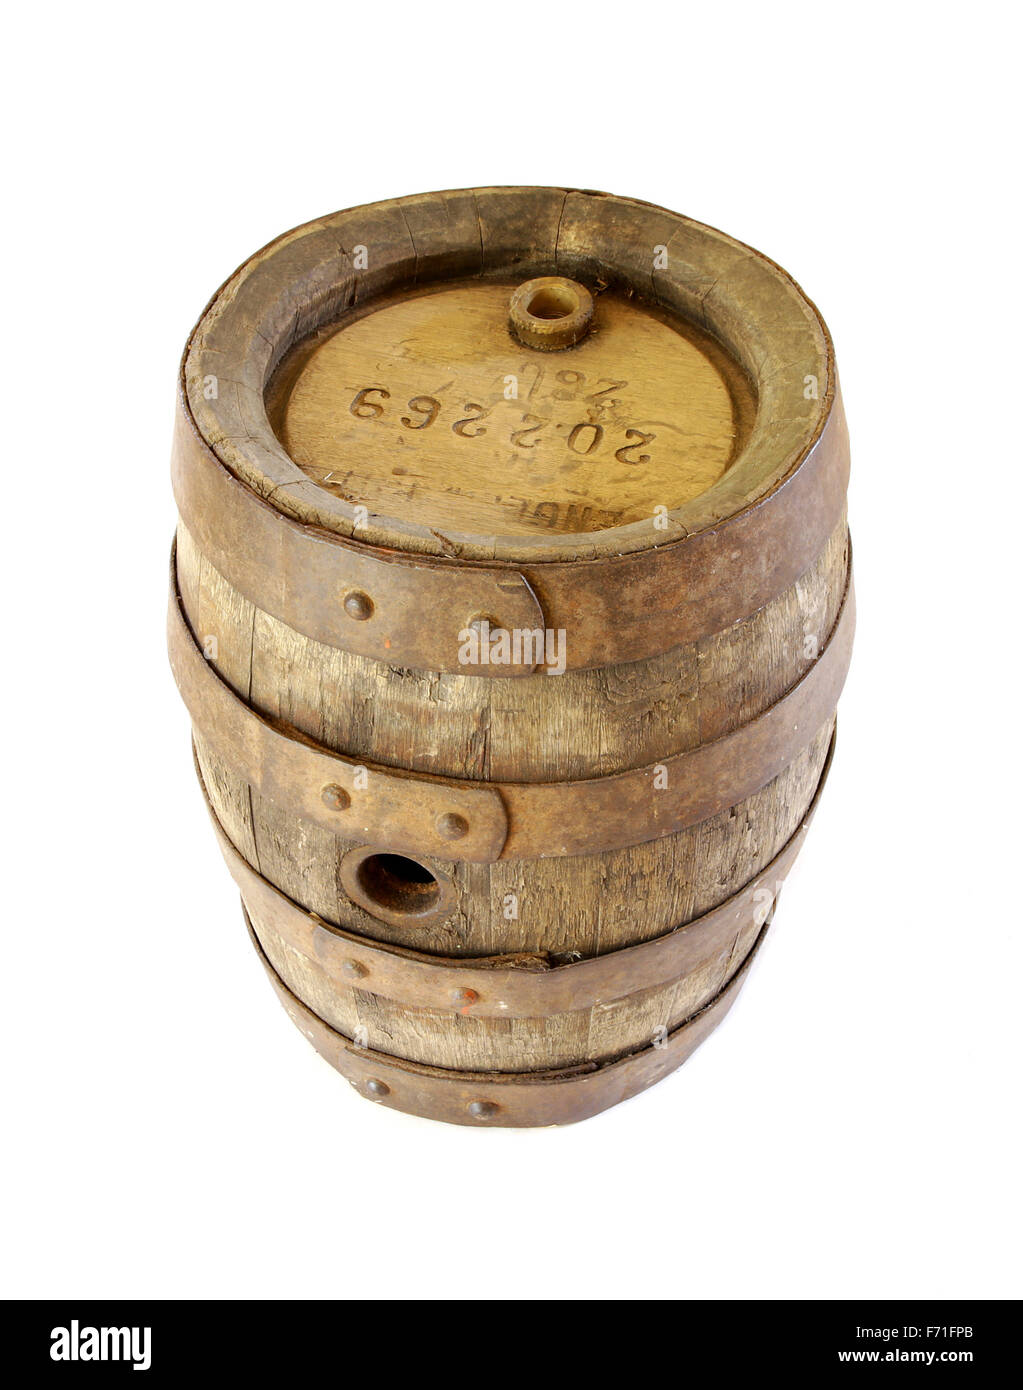 very old vintage oak wooden beer barrel in perfect condition isolated on white background Stock Photo